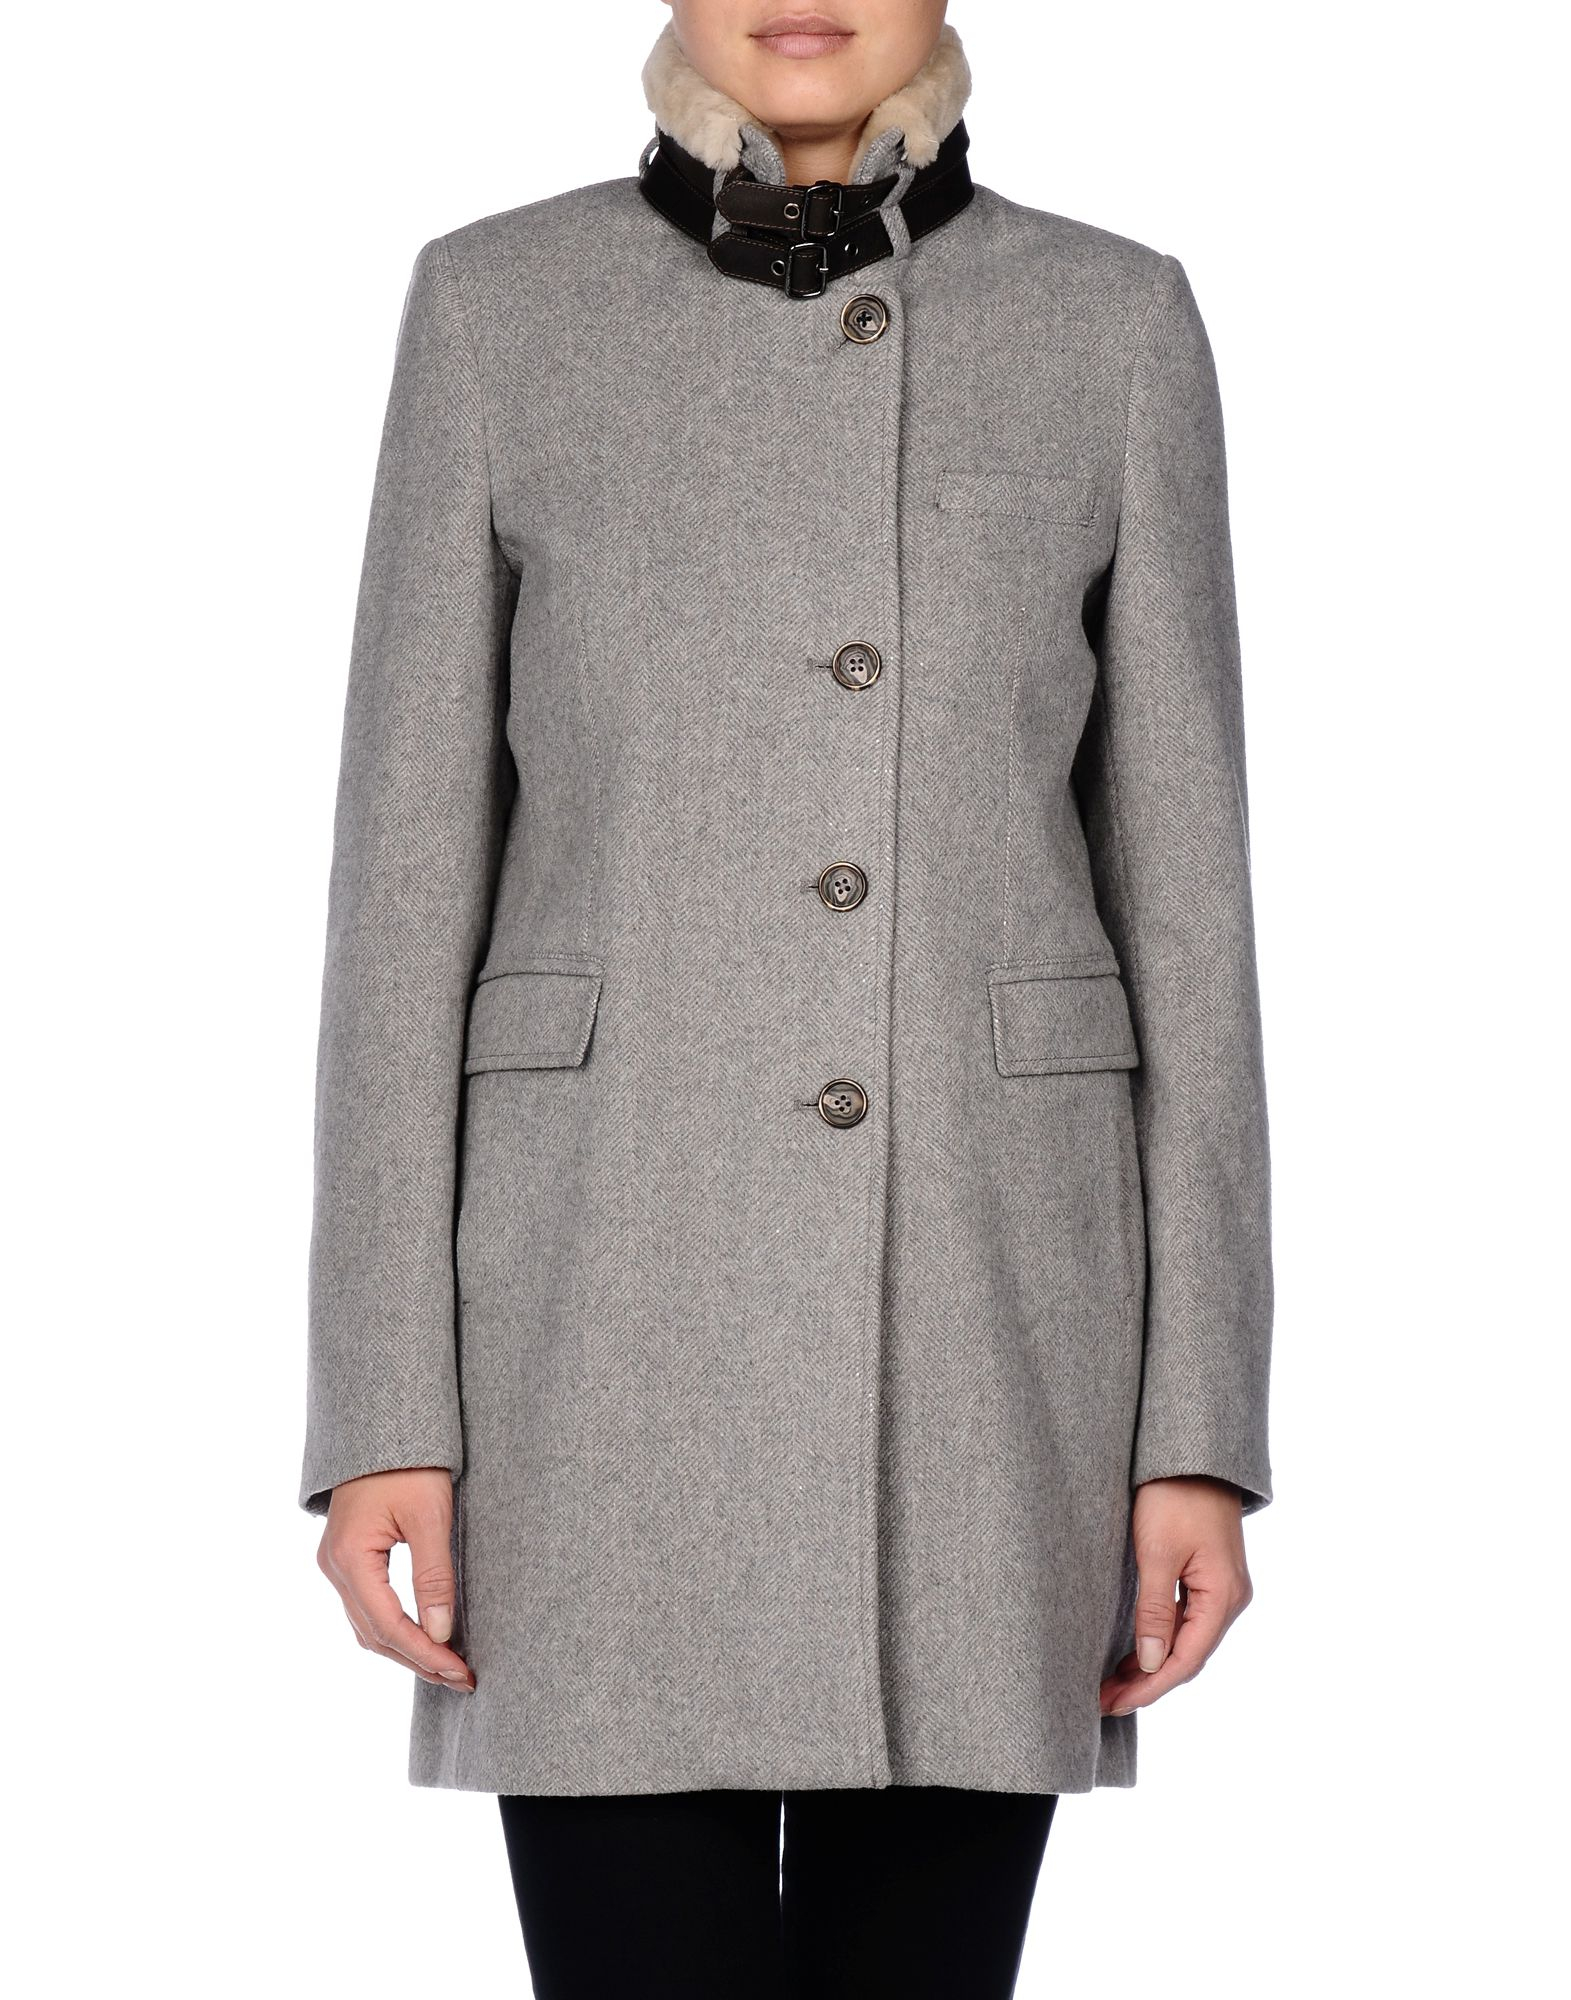 Lyst - Tommy Hilfiger Coat in Gray